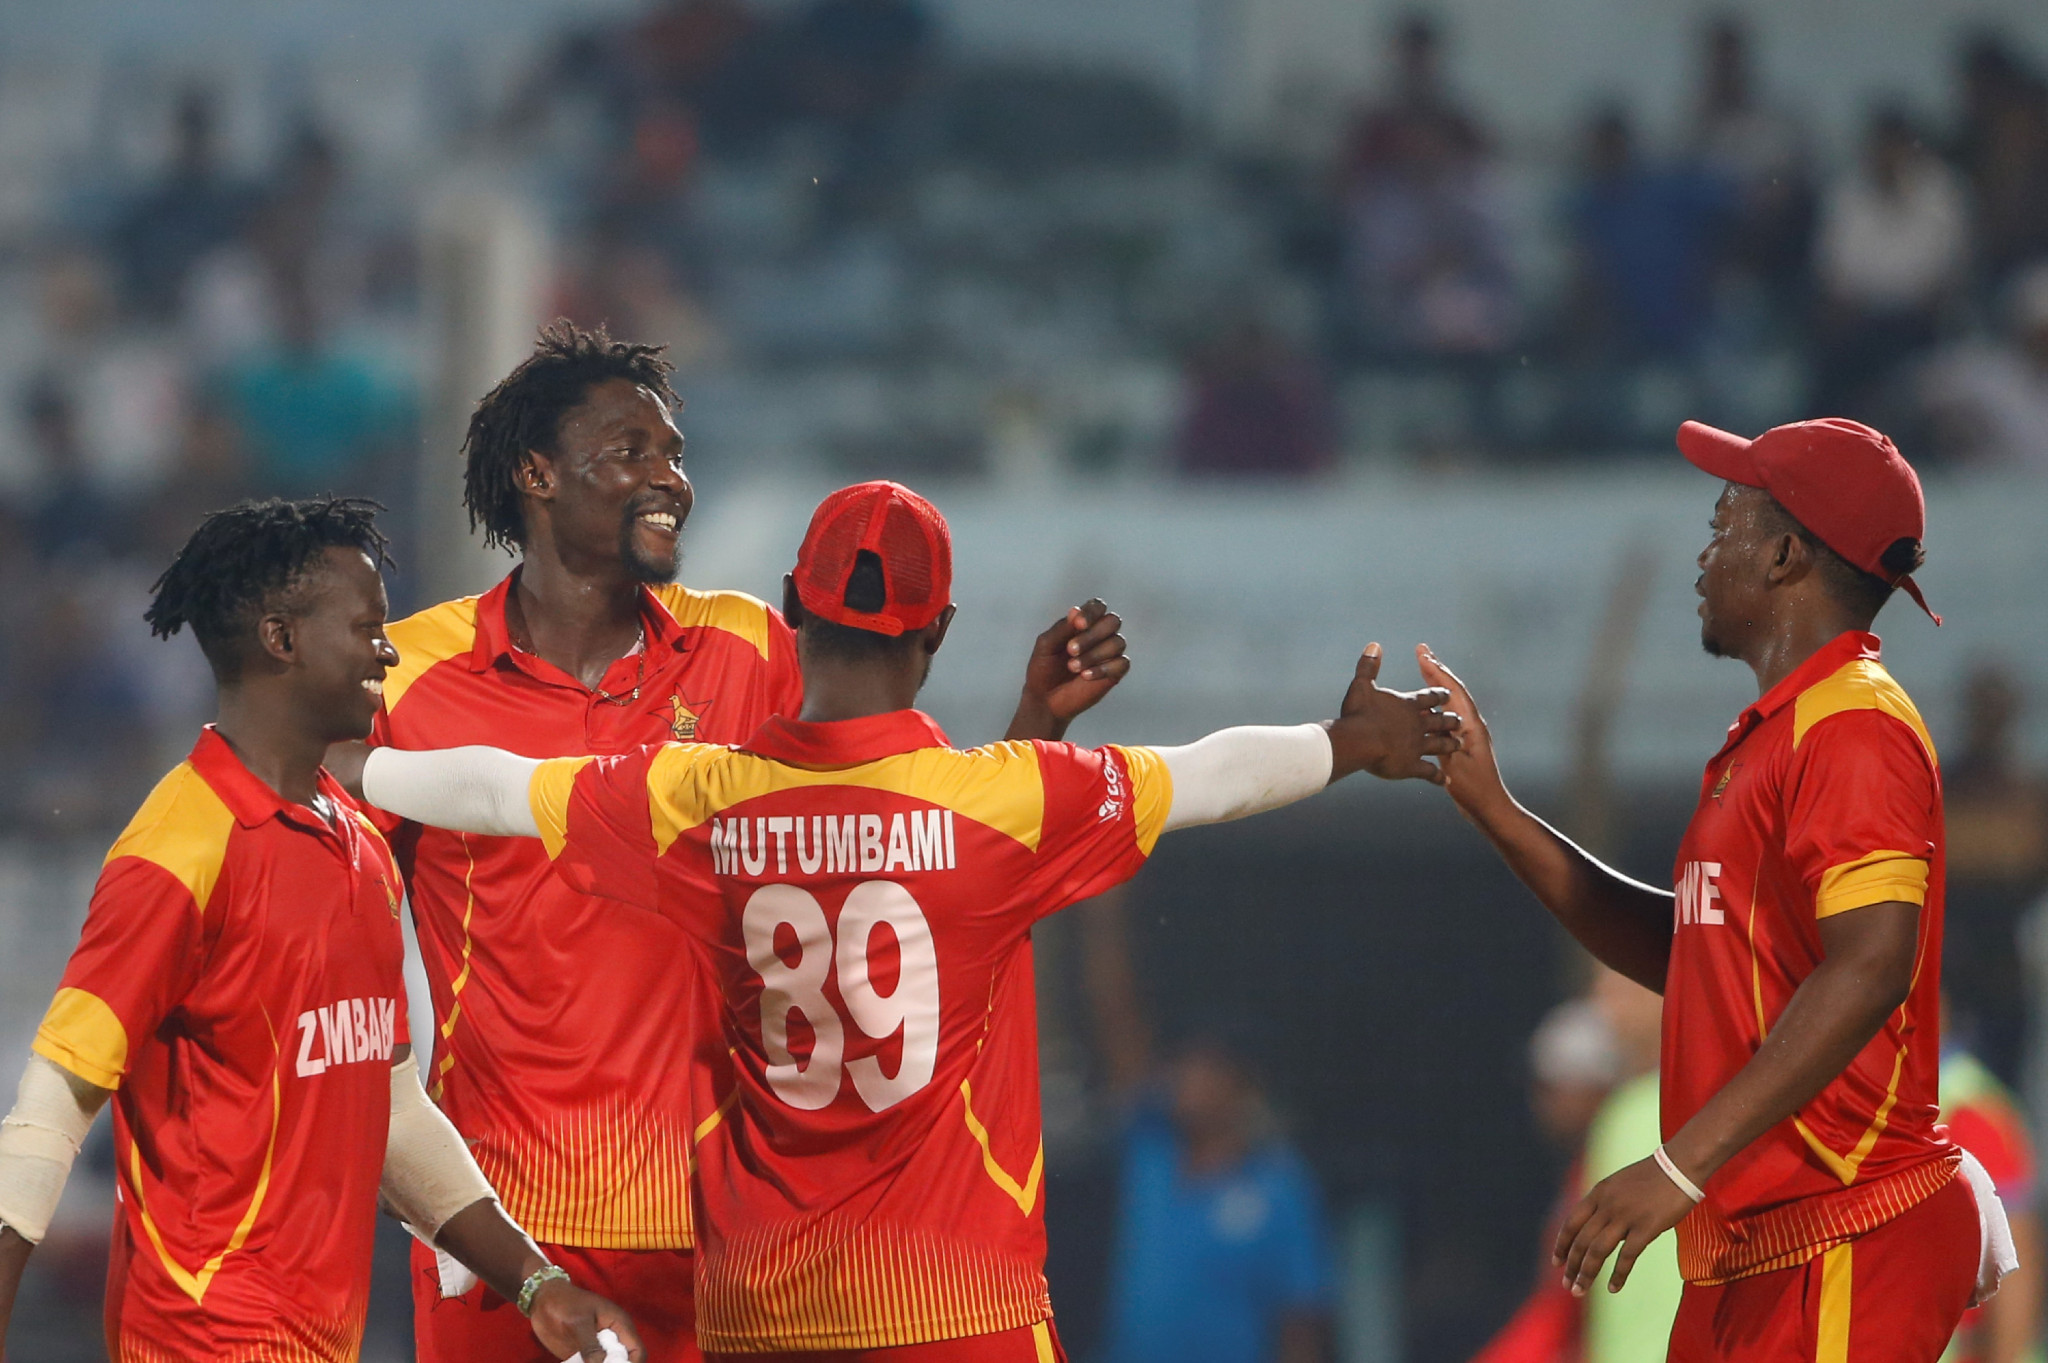 Zimbabwe's reinstatement came too late for the T20 World Cup qualifier ©Getty Images